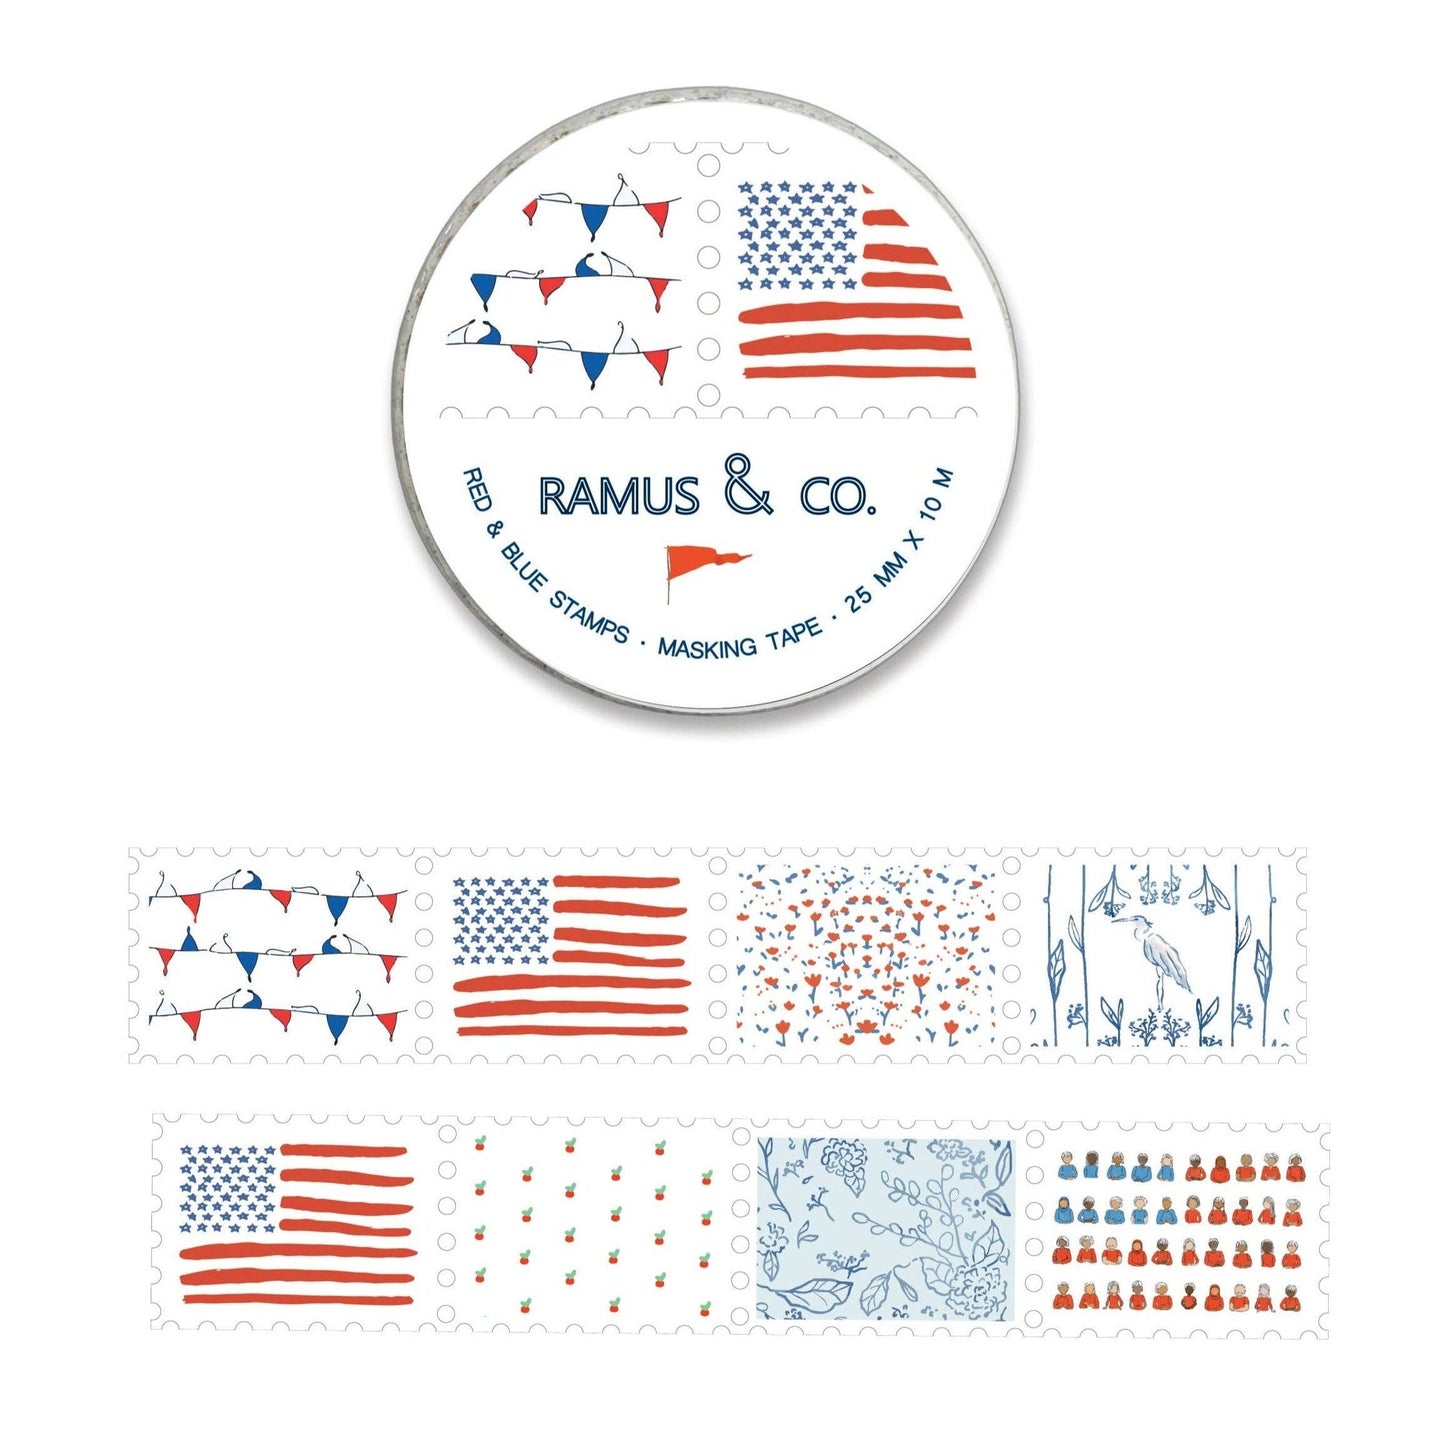 Red & Blue Masking Tape Stamps